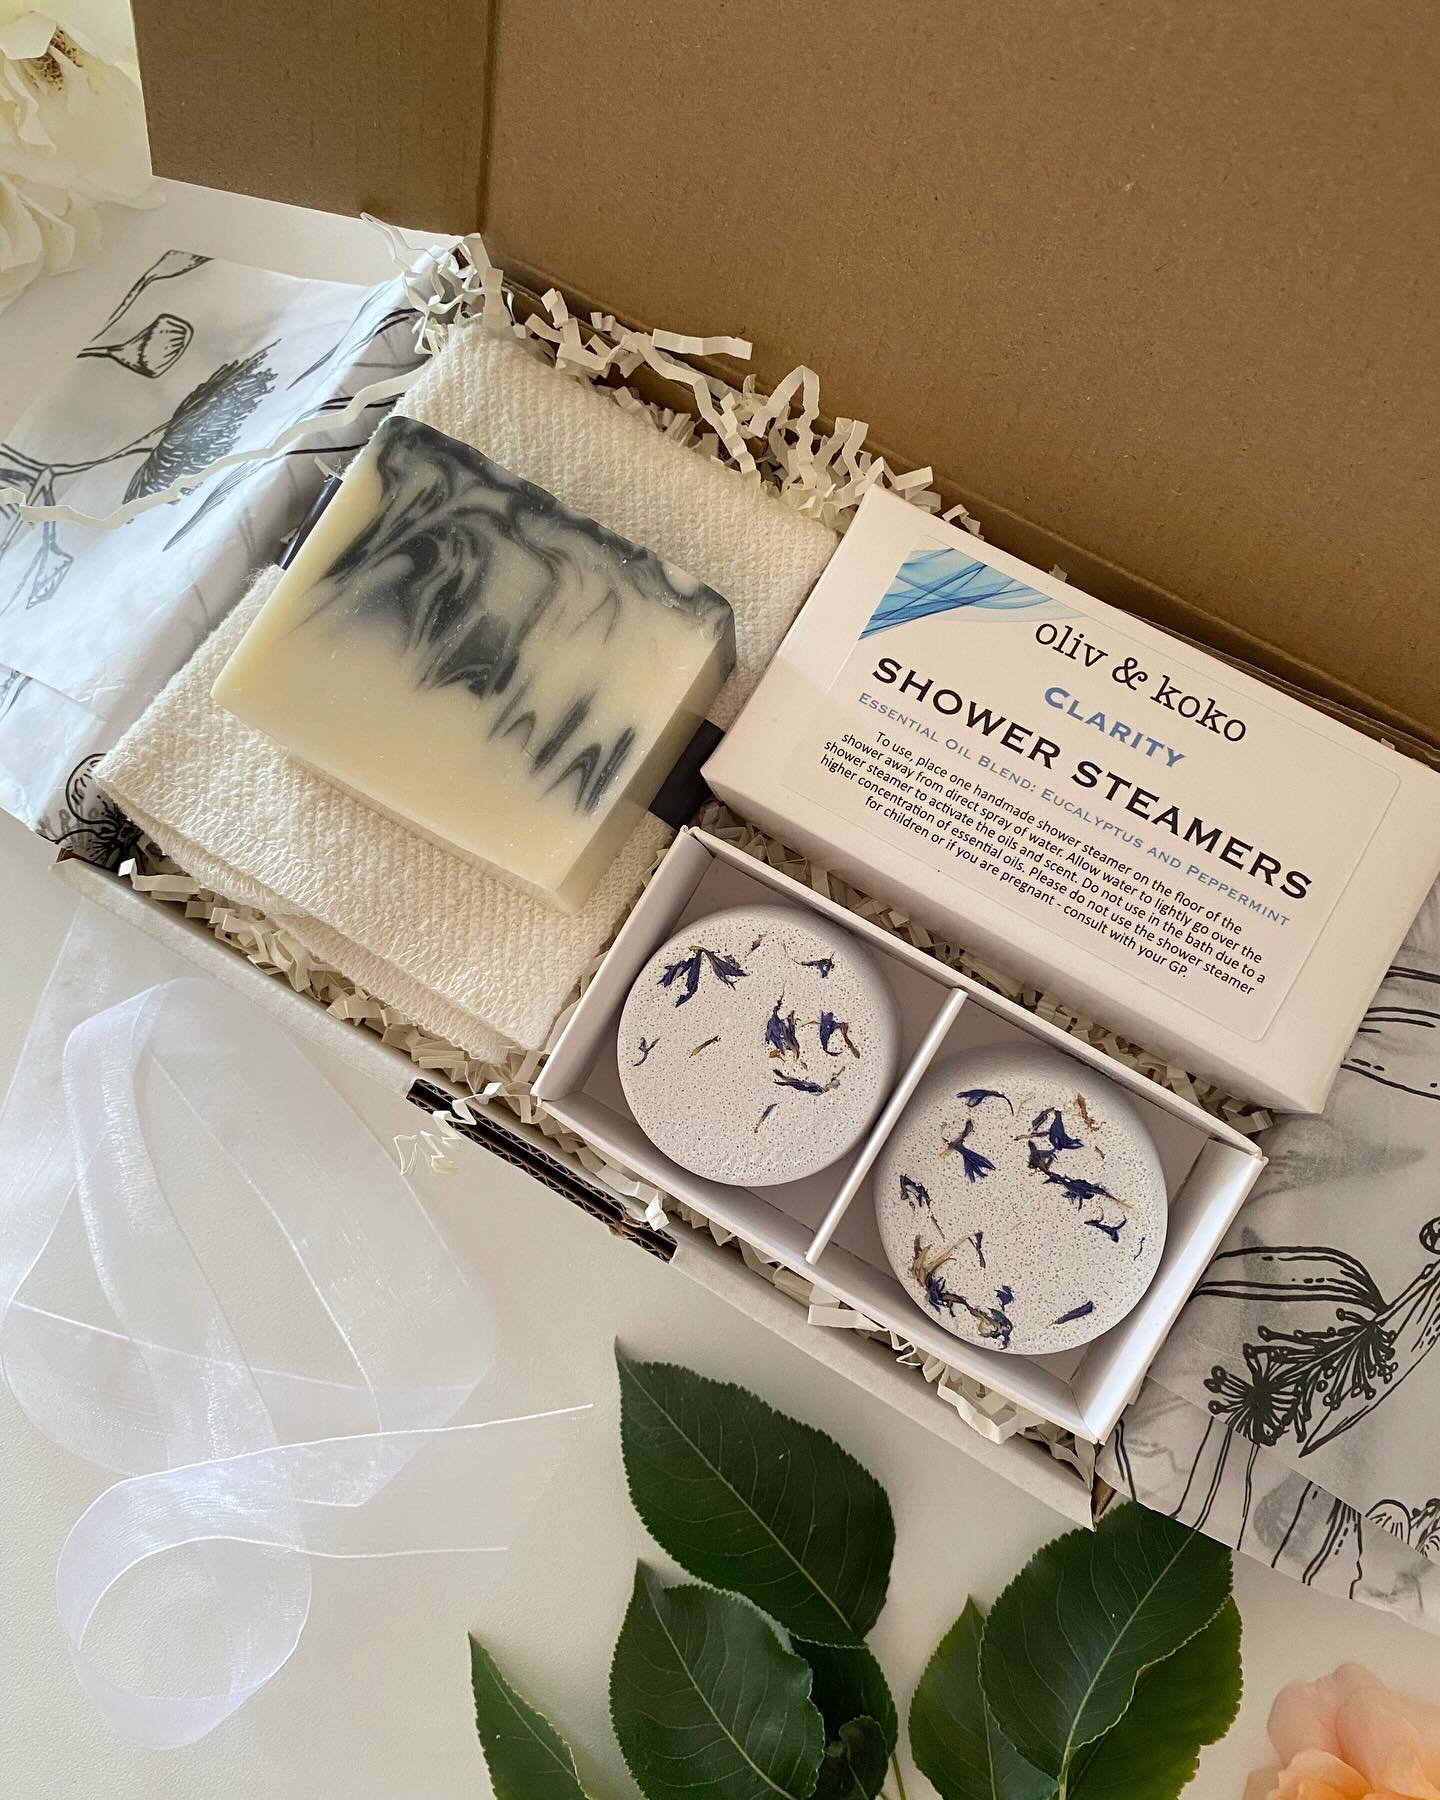 Gift Box - Clarity Soap and Shower Steamer Set

Clarity is an uplifting and refreshing blend of peppermint and eucalyptus. Fill your shower with a beautiful scent using a shower steamer and matching soap!

Great gift for friends, family or that speci